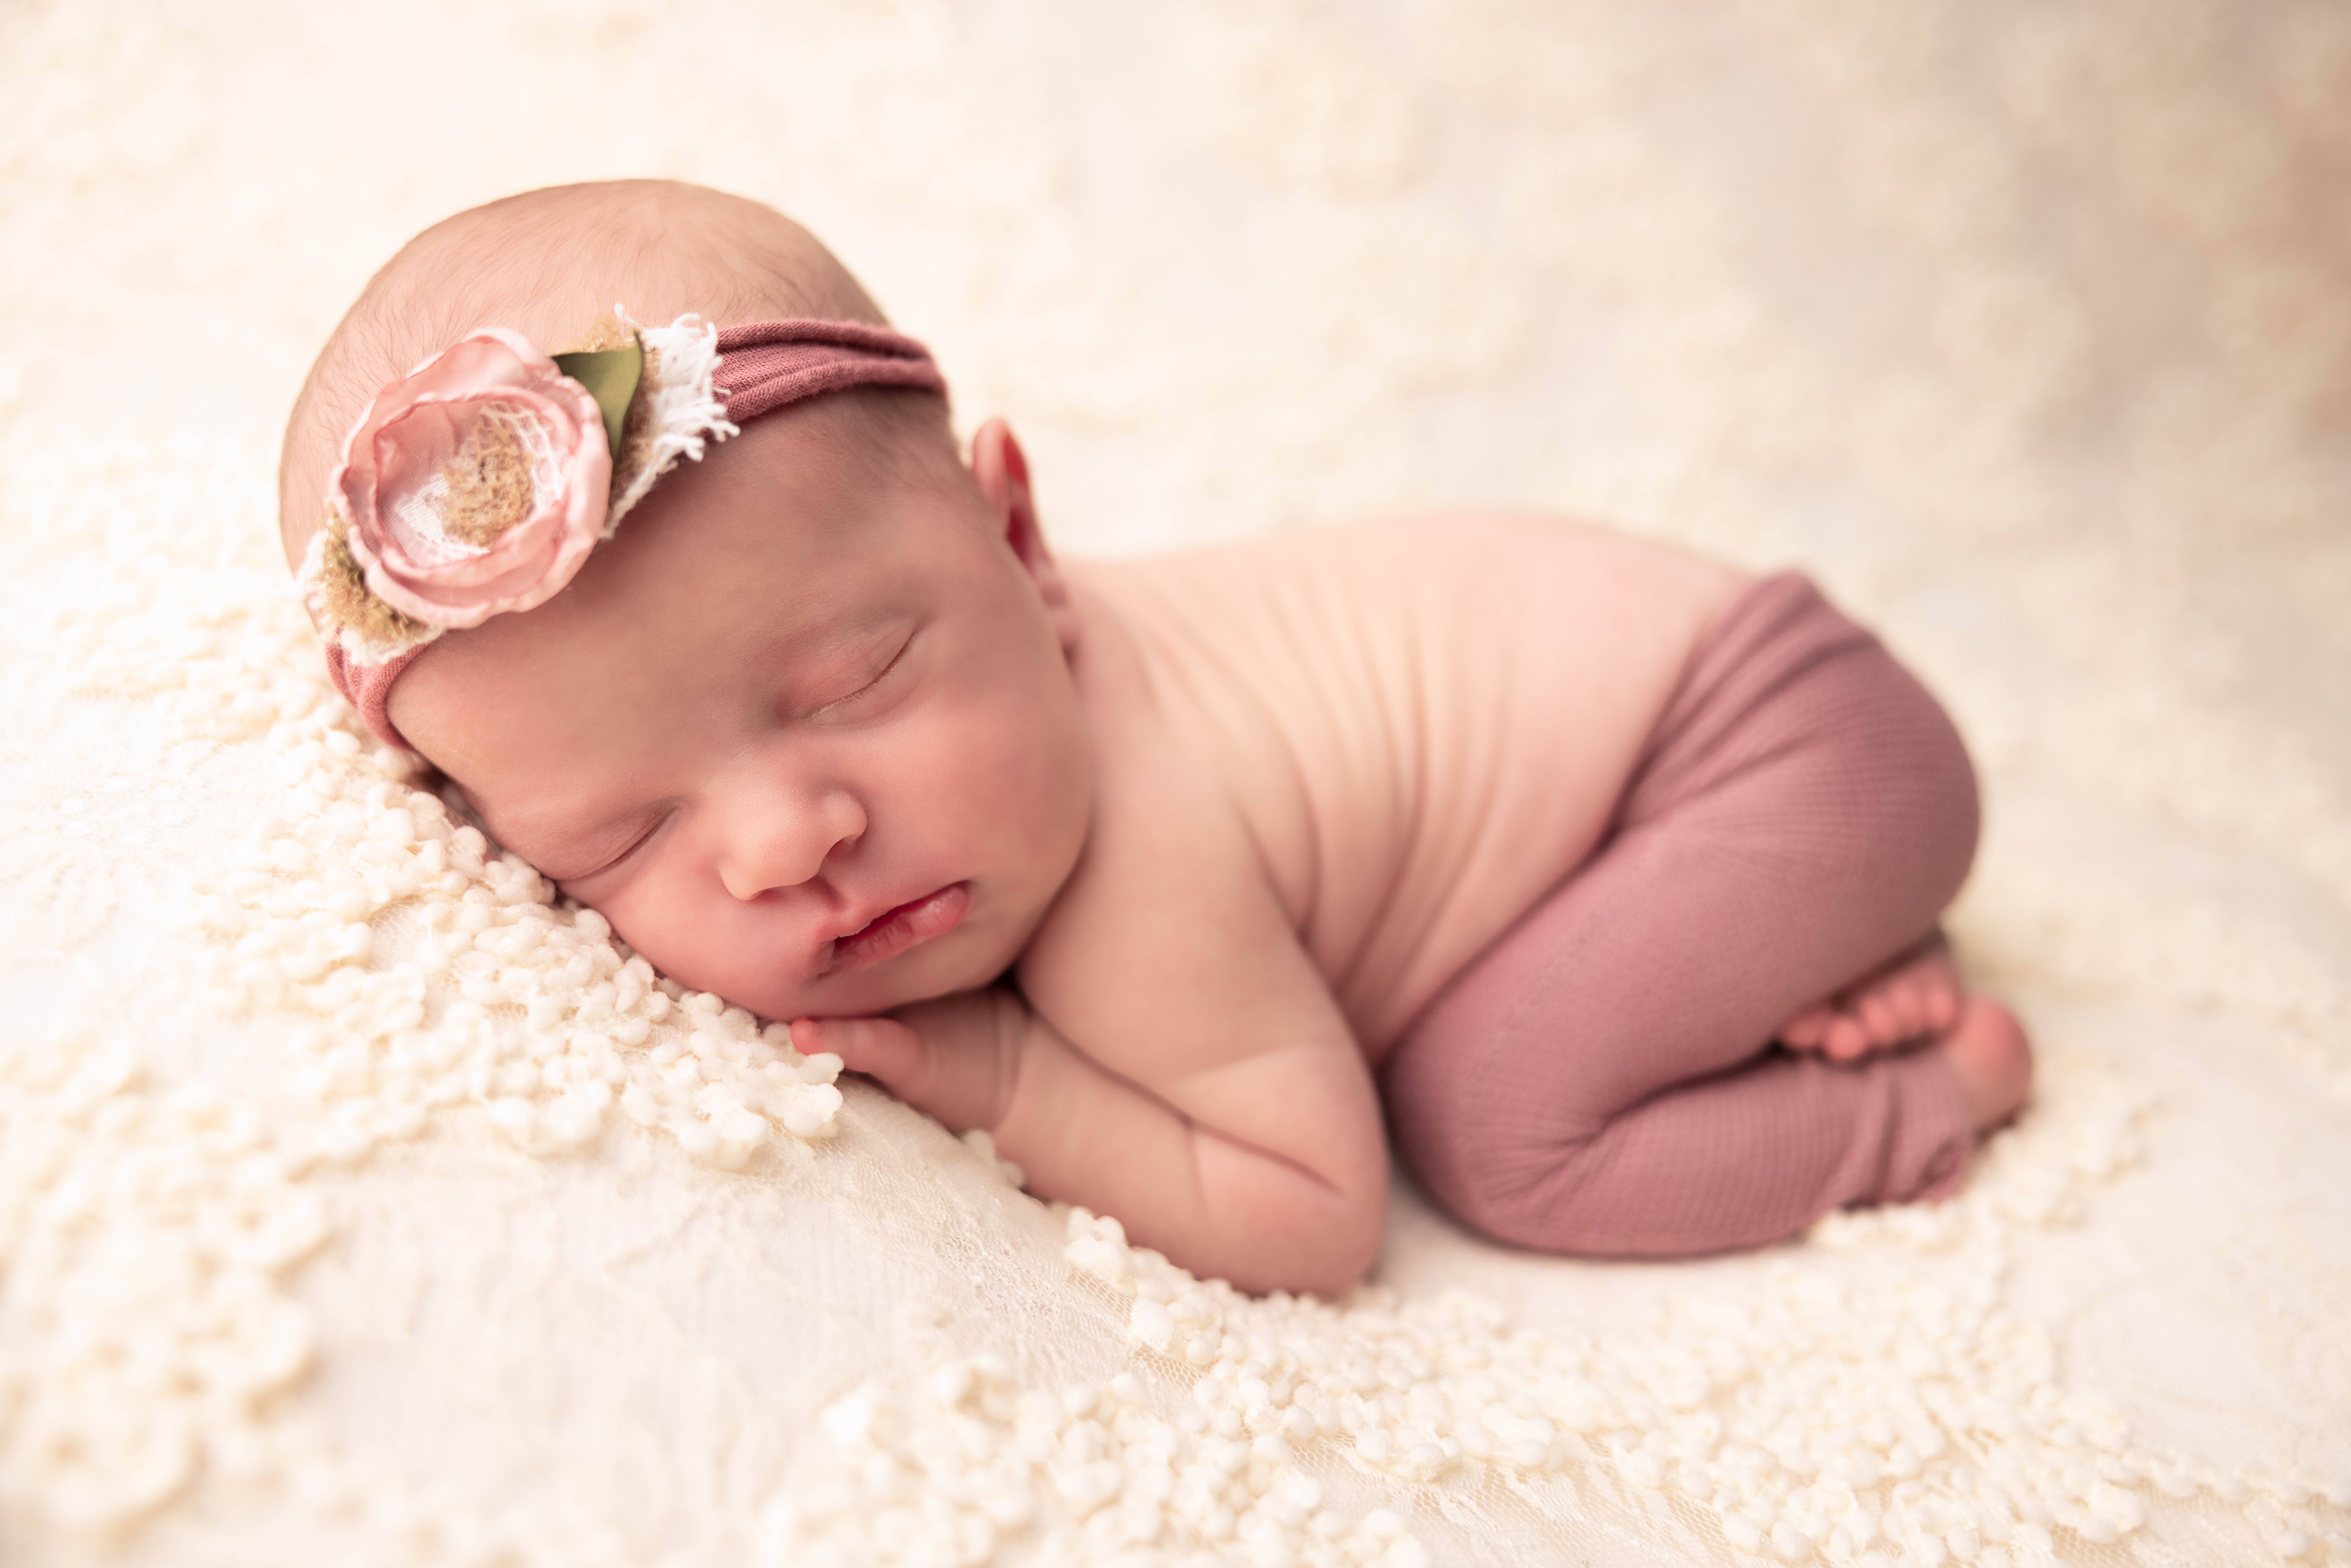 Newborn baby posed with her bum up wearing pink pants and pink headband lying on a floral lace blanket